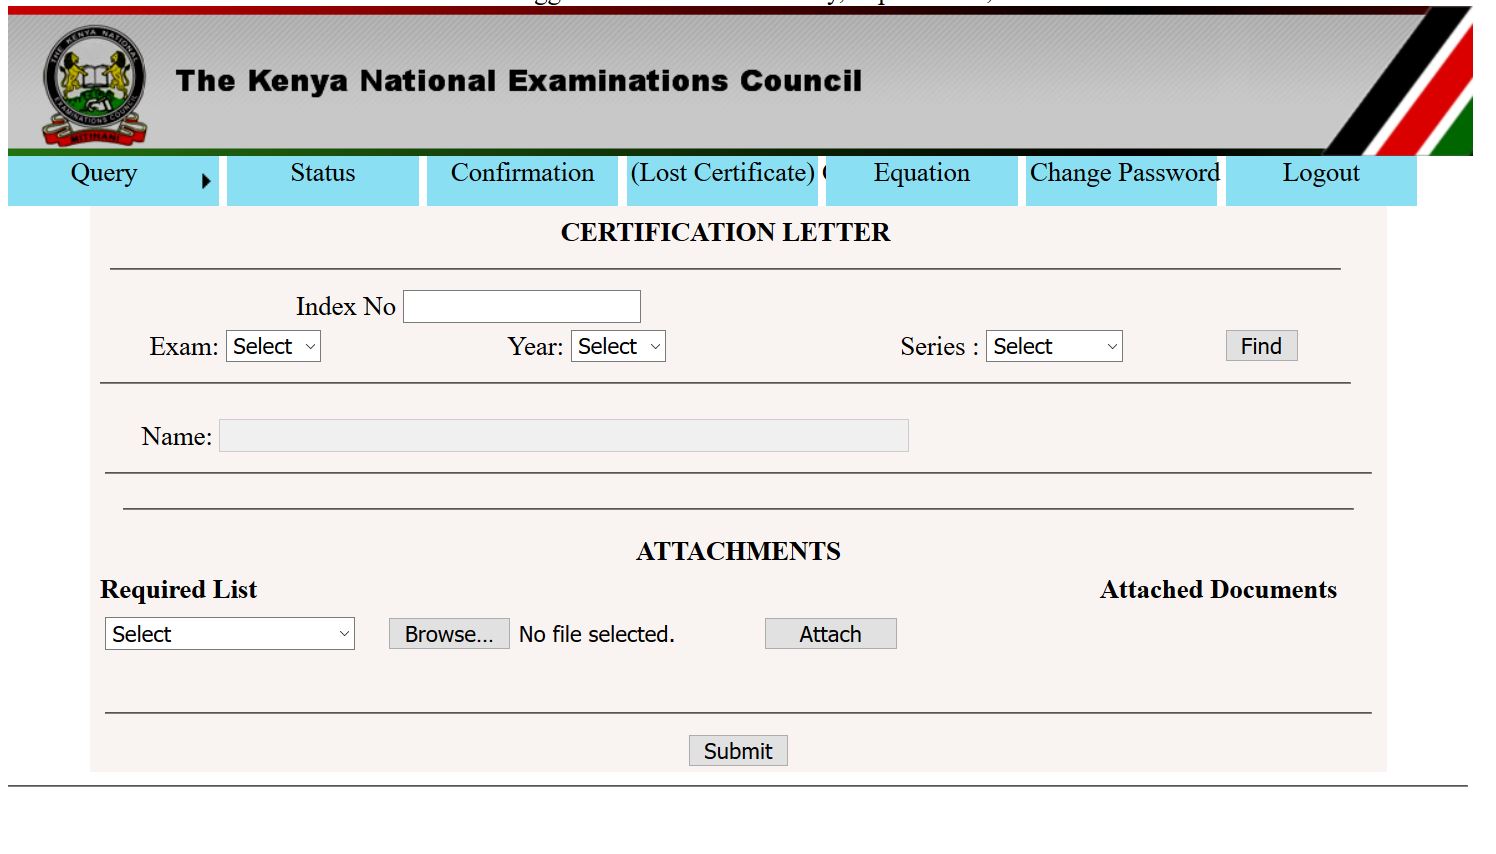 How to use KNEC QMIS portal for national exams queries